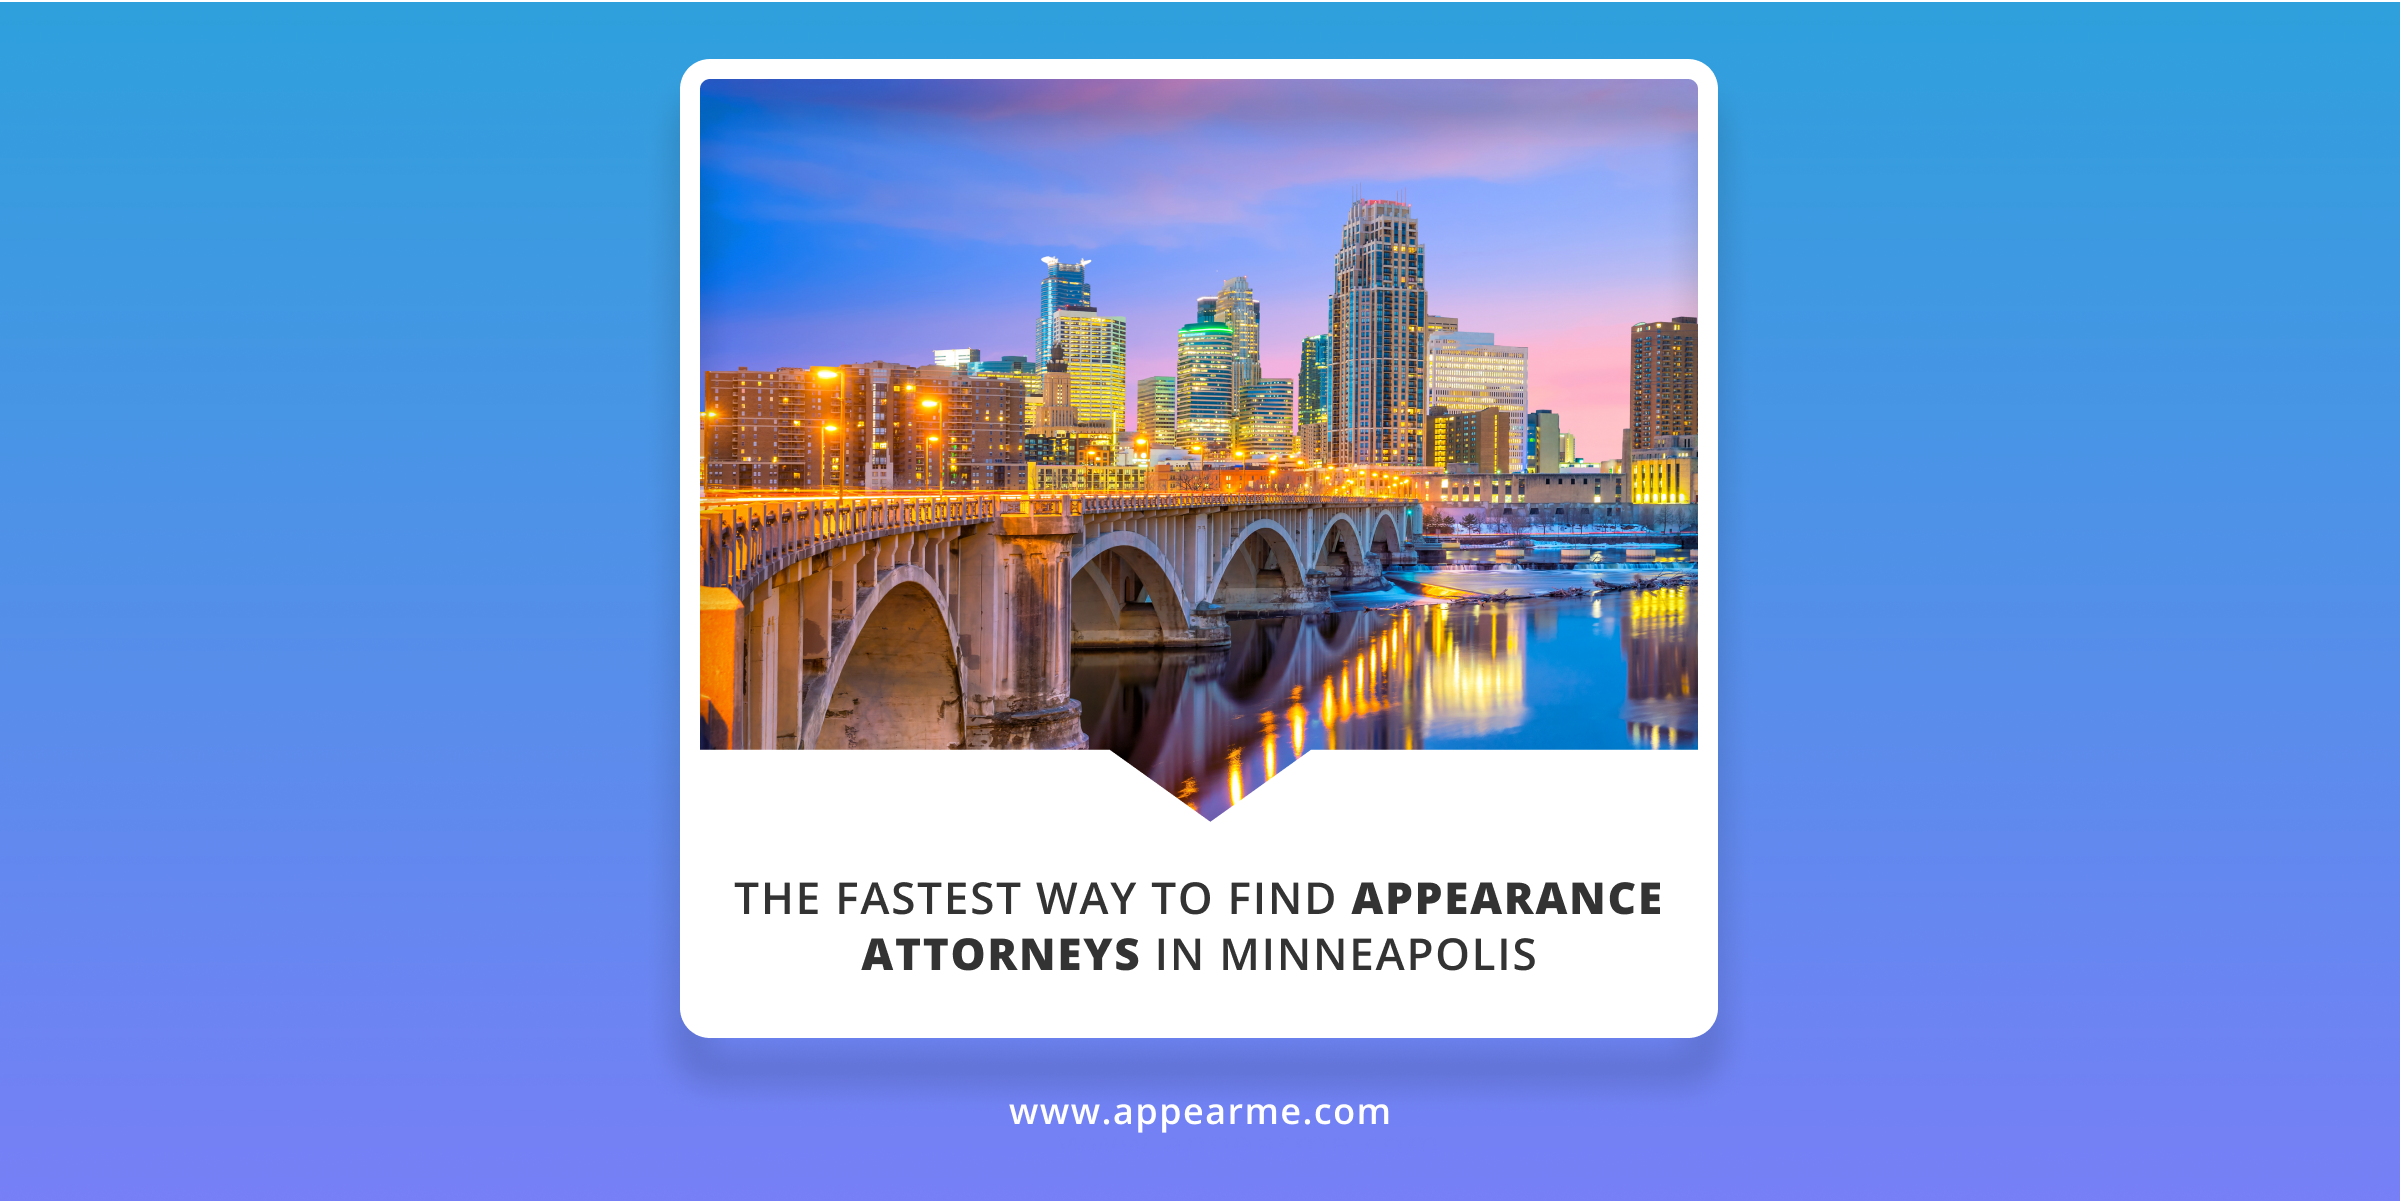 The Fastest Way to Find Appearance Attorneys in Minneapolis